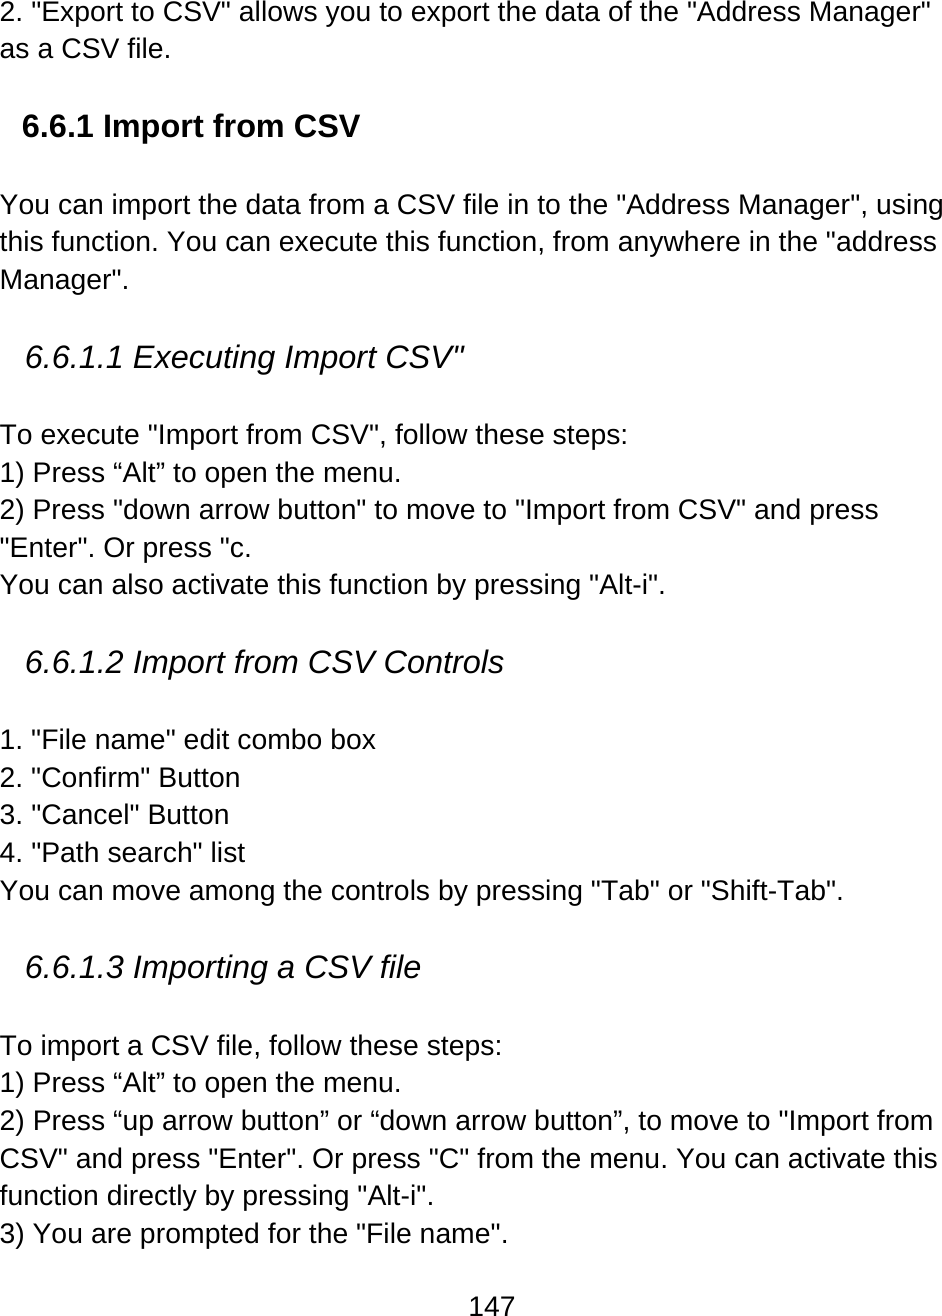 147  2. &quot;Export to CSV&quot; allows you to export the data of the &quot;Address Manager&quot; as a CSV file.  6.6.1 Import from CSV  You can import the data from a CSV file in to the &quot;Address Manager&quot;, using this function. You can execute this function, from anywhere in the &quot;address Manager&quot;.  6.6.1.1 Executing Import CSV&quot;  To execute &quot;Import from CSV&quot;, follow these steps: 1) Press “Alt” to open the menu. 2) Press &quot;down arrow button&quot; to move to &quot;Import from CSV&quot; and press &quot;Enter&quot;. Or press &quot;c. You can also activate this function by pressing &quot;Alt-i&quot;.  6.6.1.2 Import from CSV Controls  1. &quot;File name&quot; edit combo box 2. &quot;Confirm&quot; Button 3. &quot;Cancel&quot; Button 4. &quot;Path search&quot; list You can move among the controls by pressing &quot;Tab&quot; or &quot;Shift-Tab&quot;.  6.6.1.3 Importing a CSV file  To import a CSV file, follow these steps: 1) Press “Alt” to open the menu. 2) Press “up arrow button” or “down arrow button”, to move to &quot;Import from CSV&quot; and press &quot;Enter&quot;. Or press &quot;C&quot; from the menu. You can activate this function directly by pressing &quot;Alt-i&quot;. 3) You are prompted for the &quot;File name&quot;. 